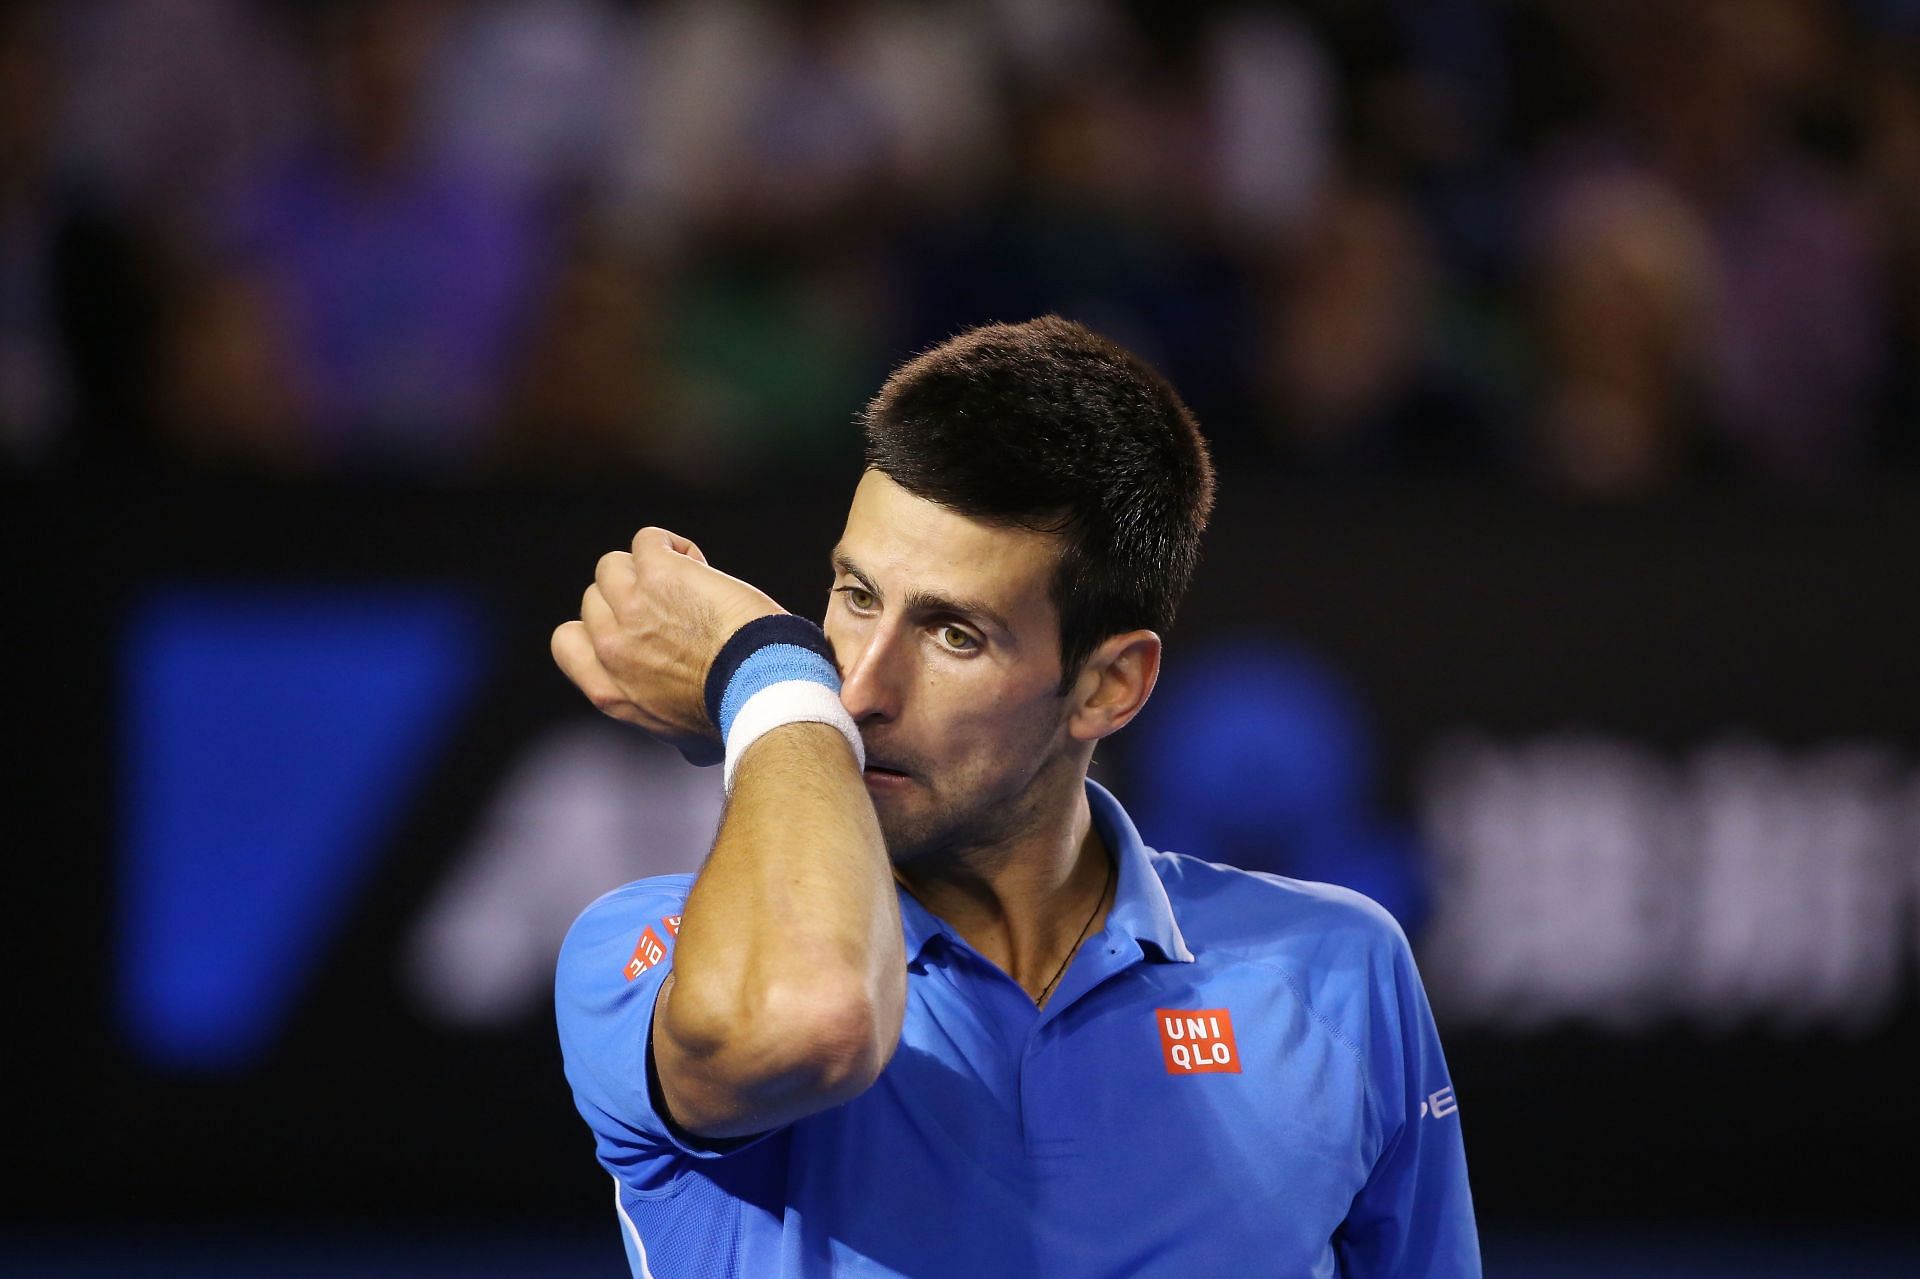 Novak Djokovic thought highly of Stan Wawrinka, calling him one of his &quot;toughtest opponents&quot;